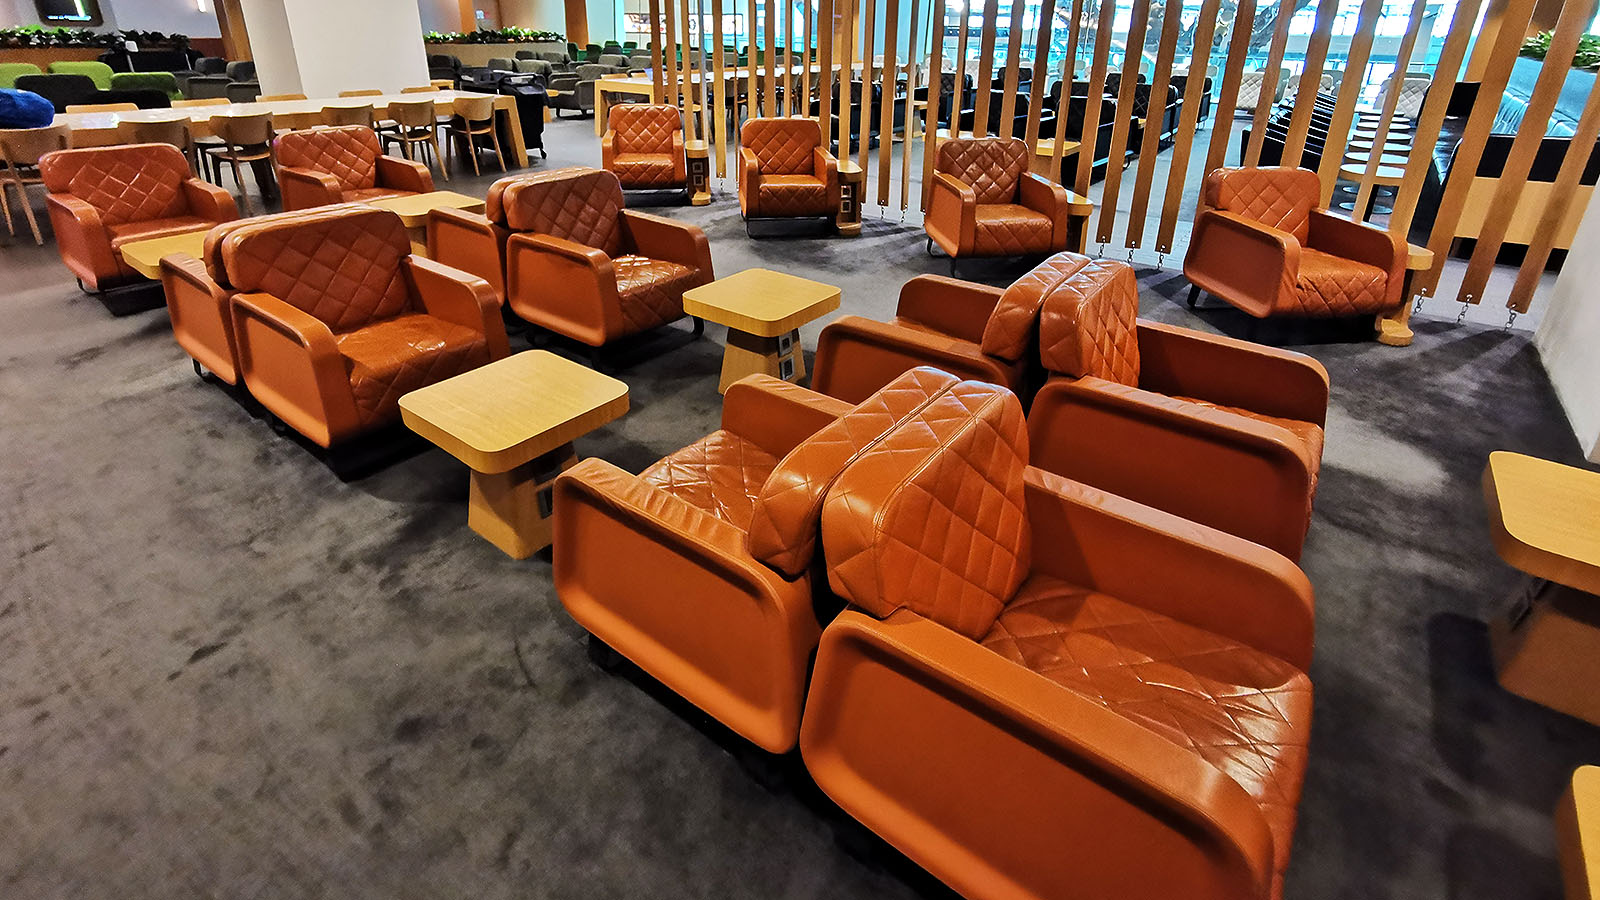 Leather seats at the Qantas International Business Lounge in Singapore